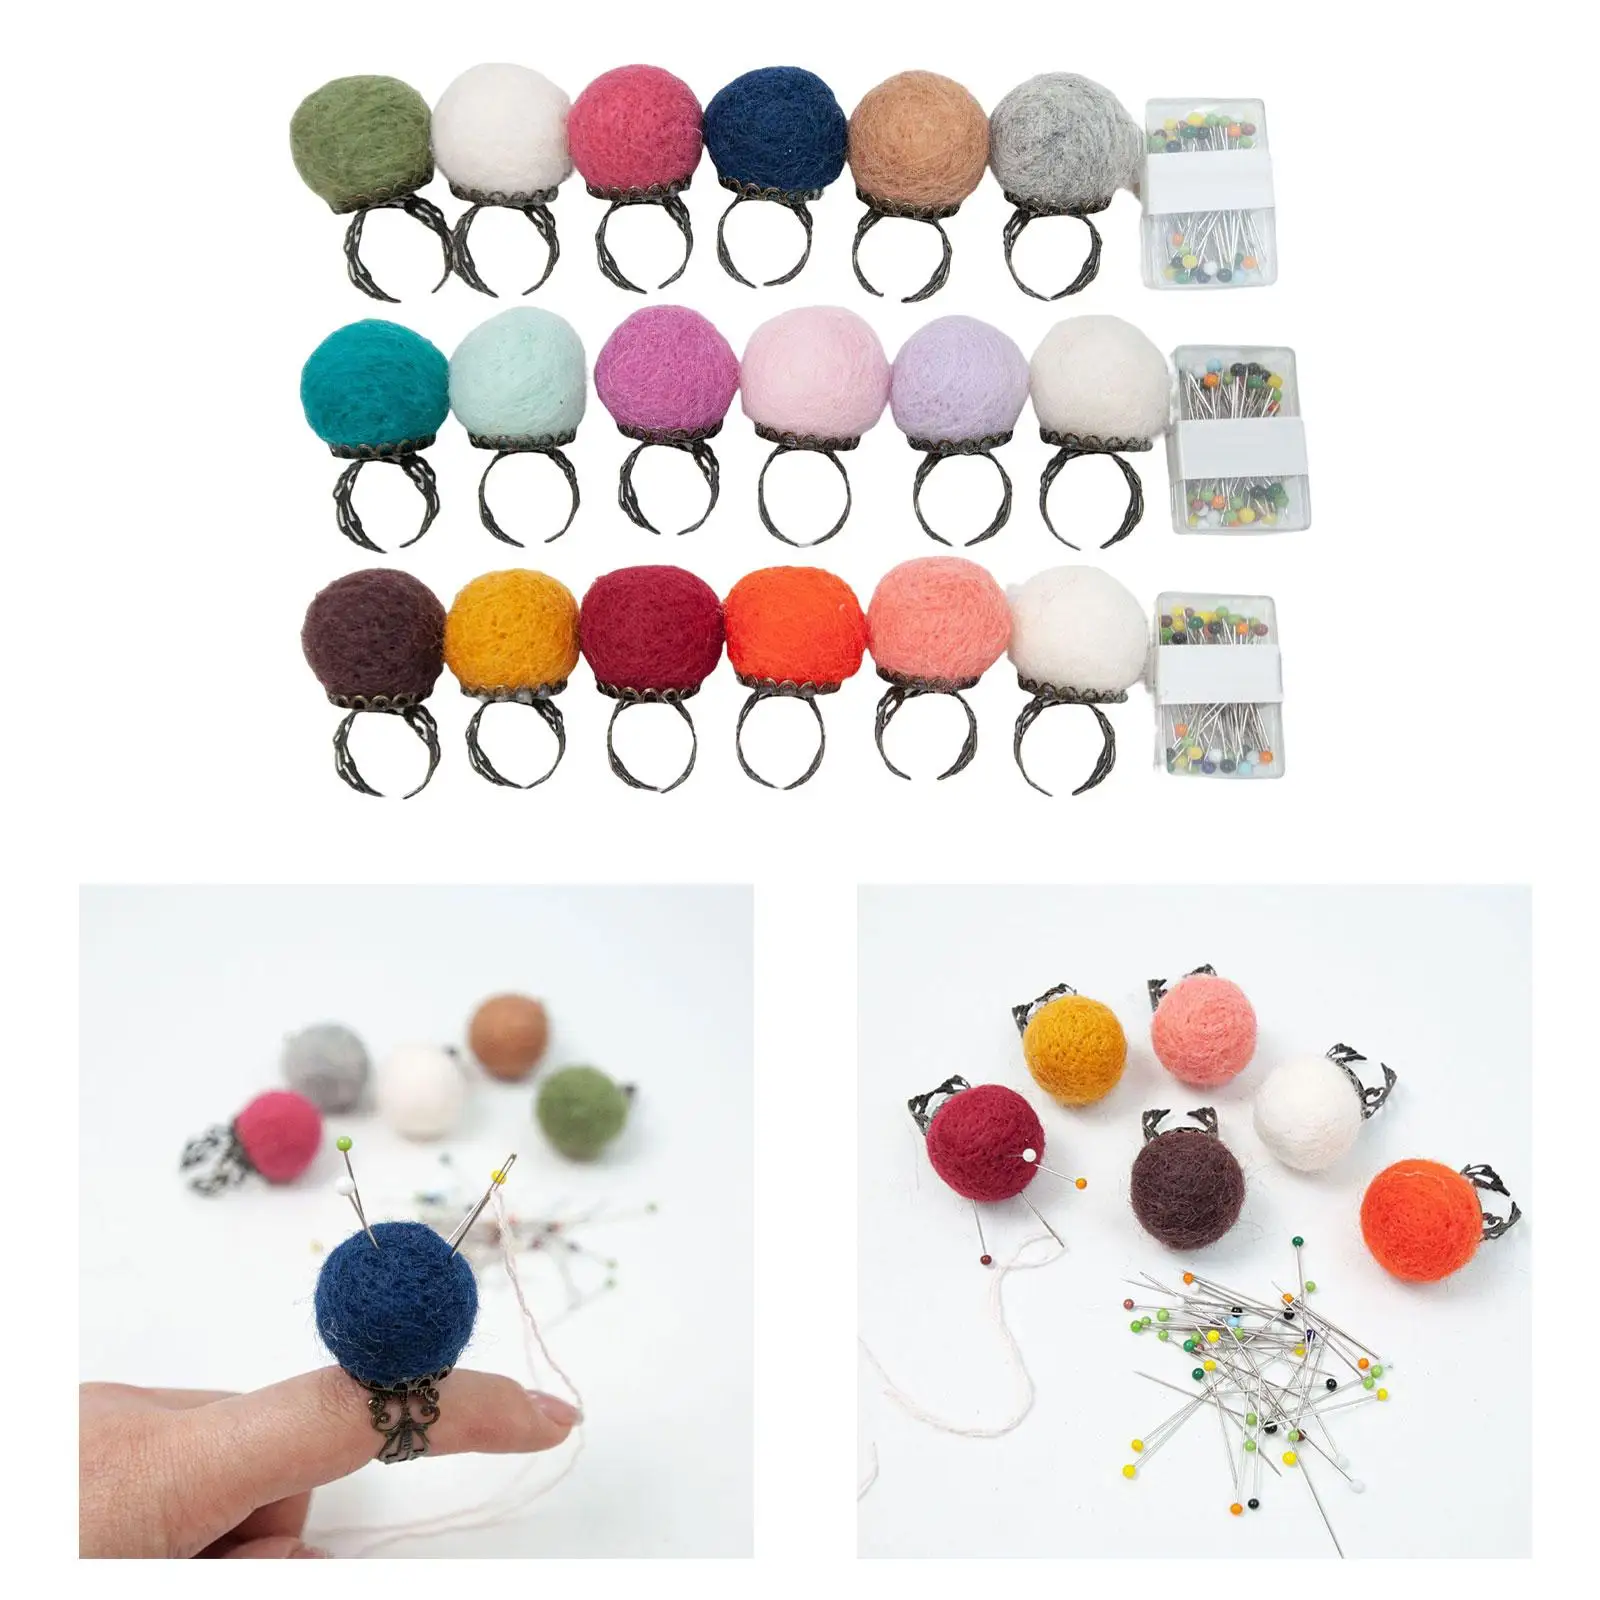 6x Felt Pin Cushion Kit Small Insert Pin Cushion Handmade Needlework Ornament Wearable for Sewing Supplies Quilting Accessory